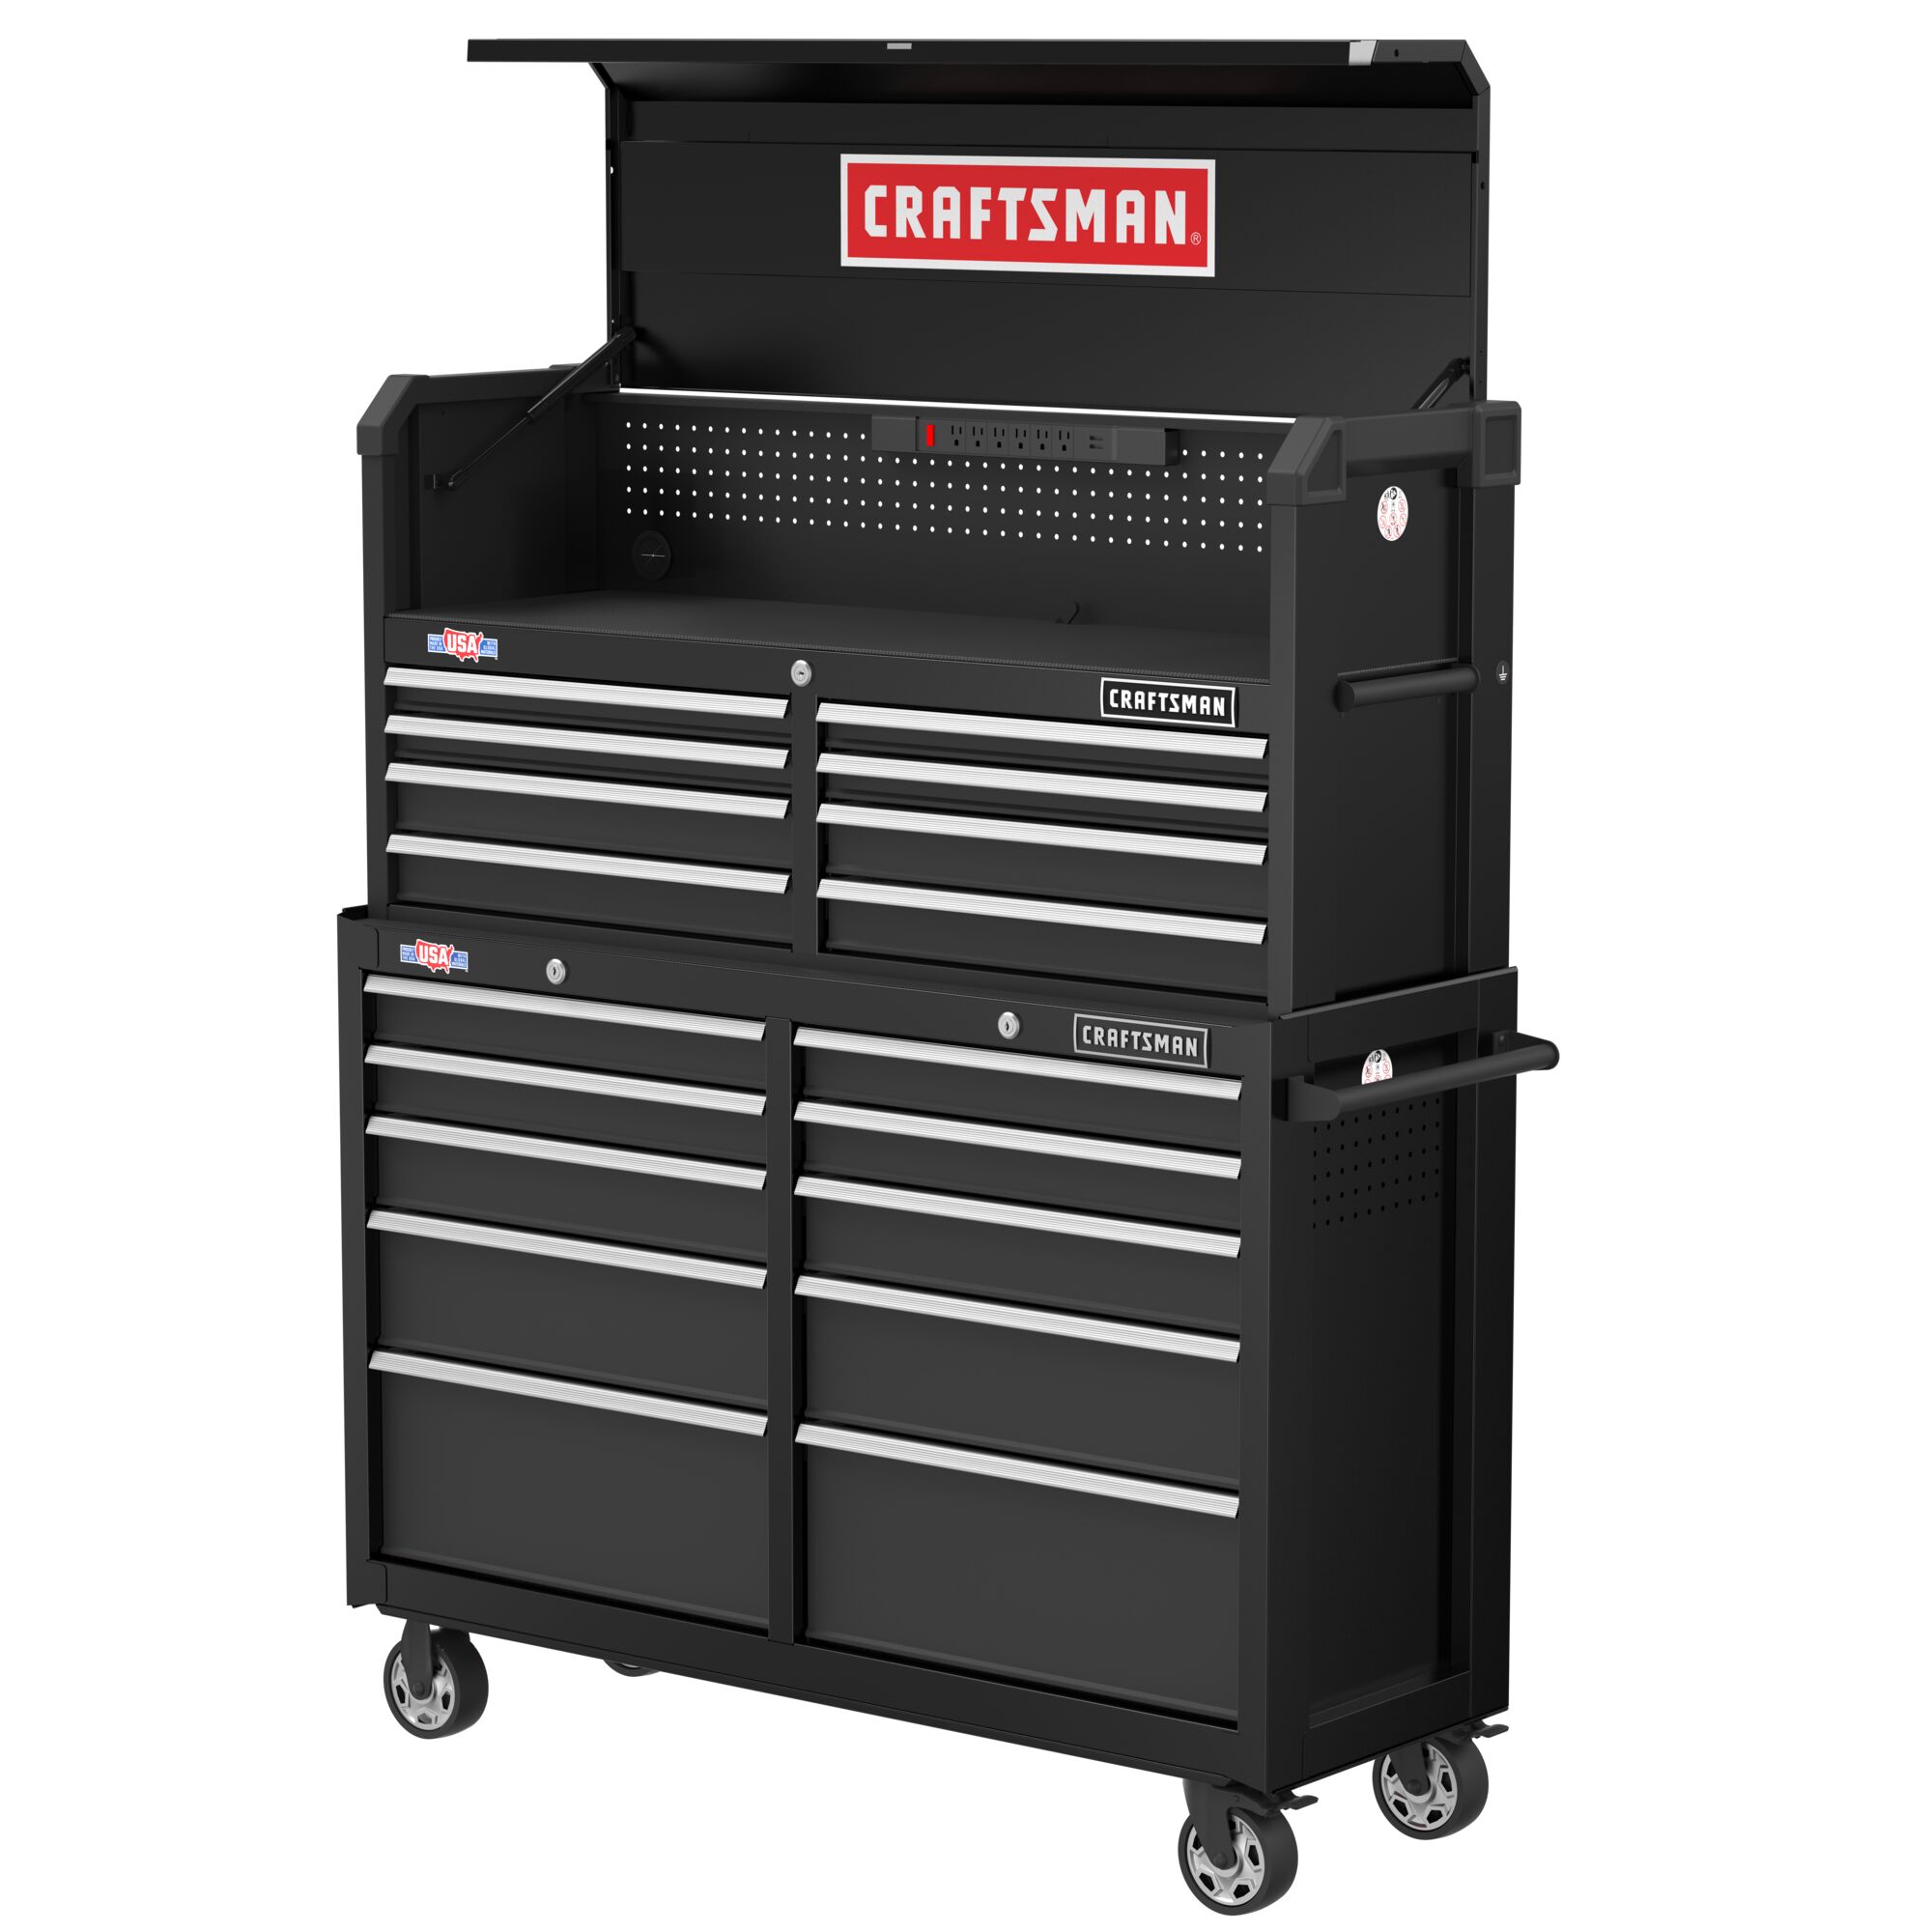 52 inch 10 drawer rolling tool cabinet with tool chest on top.